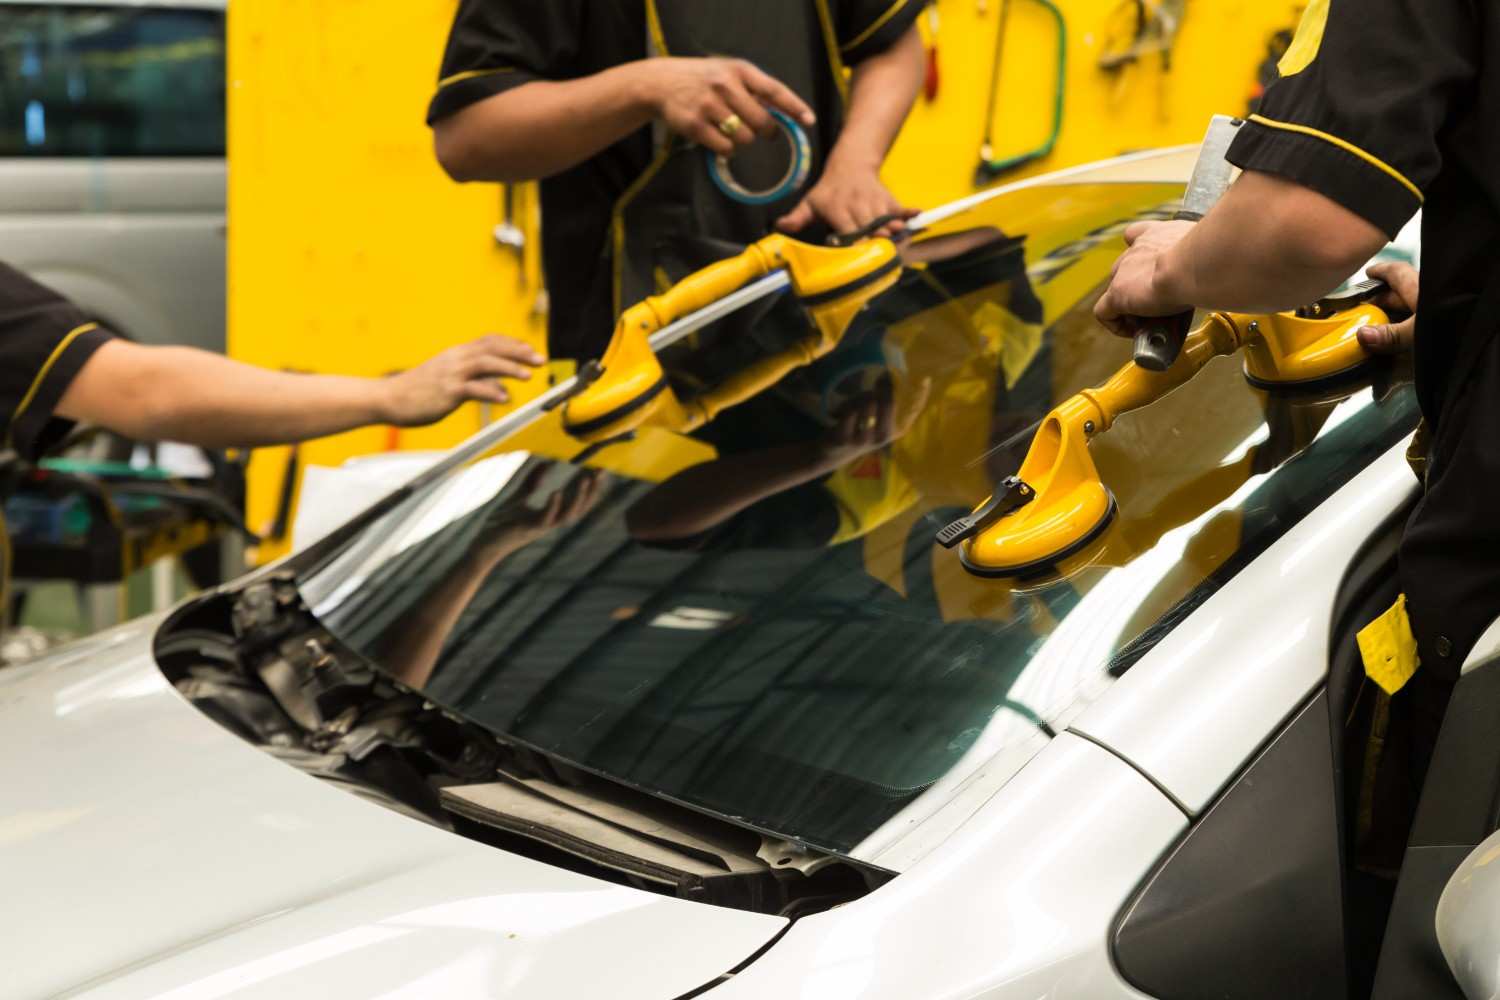 Windshield Replacement Scottsdale AZ Get Professional Auto Glass Repair and Replacement Services with  Phoenix Mobile Auto Glass